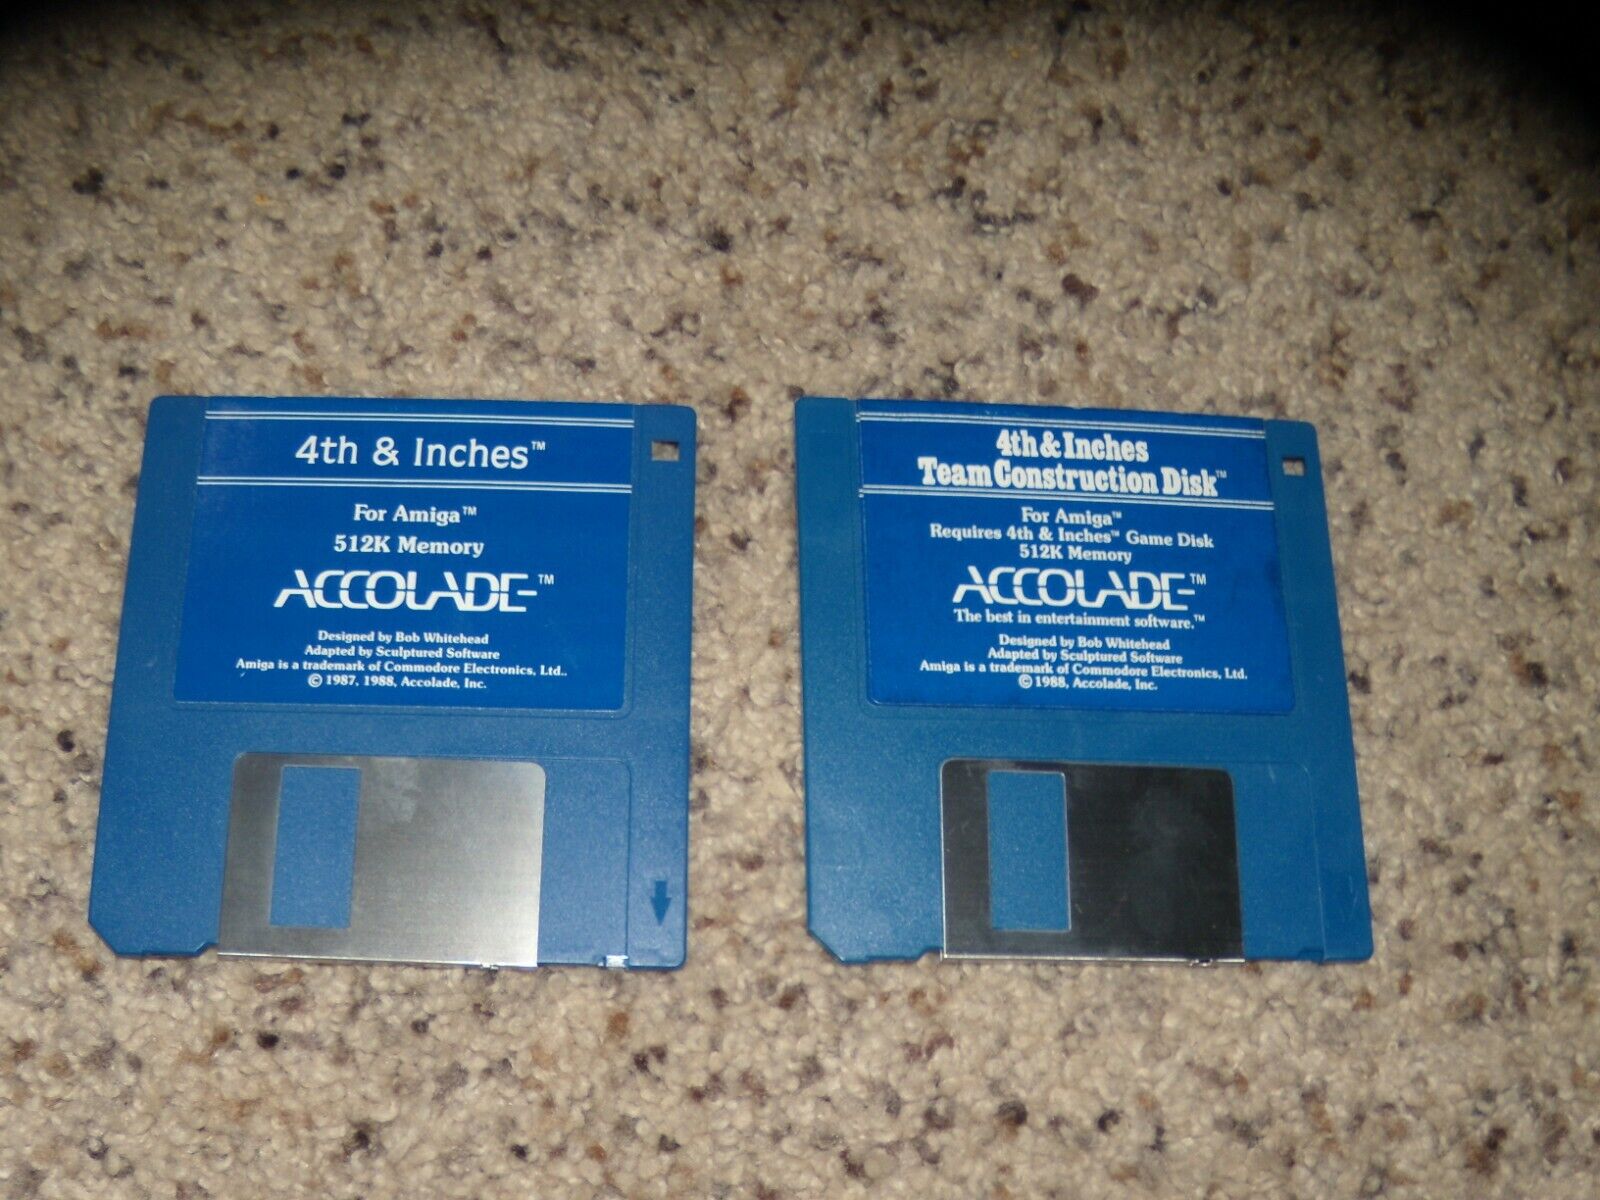 4th & Inches and 4th & Inches Team Construction Disk Commodore Amiga 3.5\